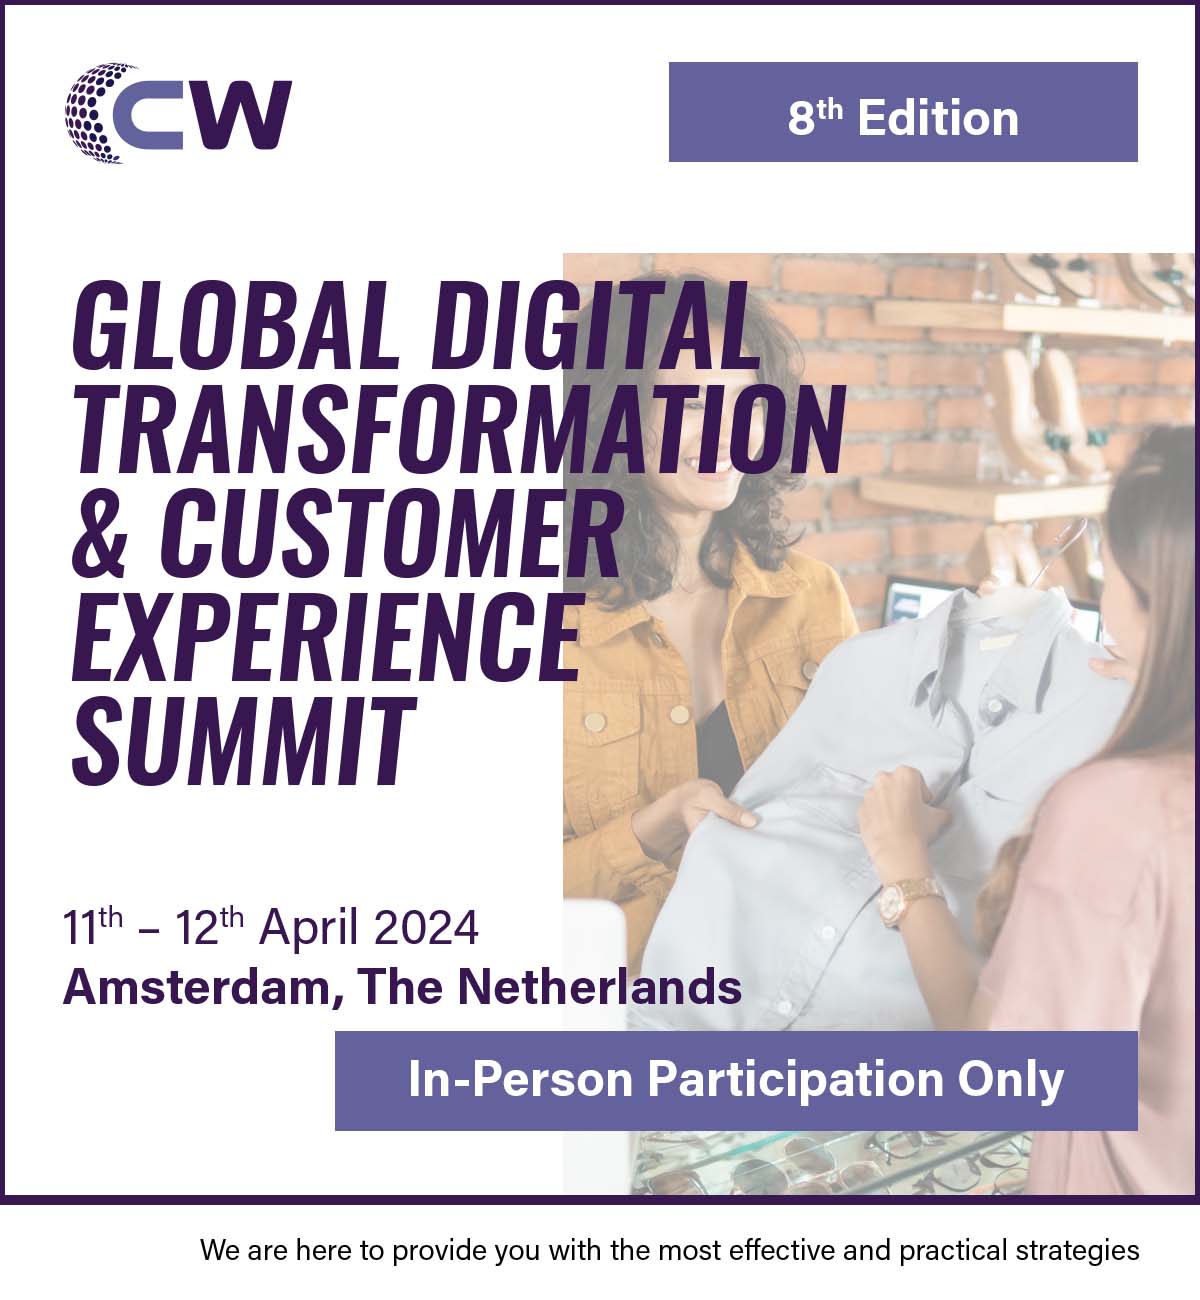 GLOBAL DIGITAL TRANSFORMATION AND CUSTOMER EXPERIENCE SUMMIT